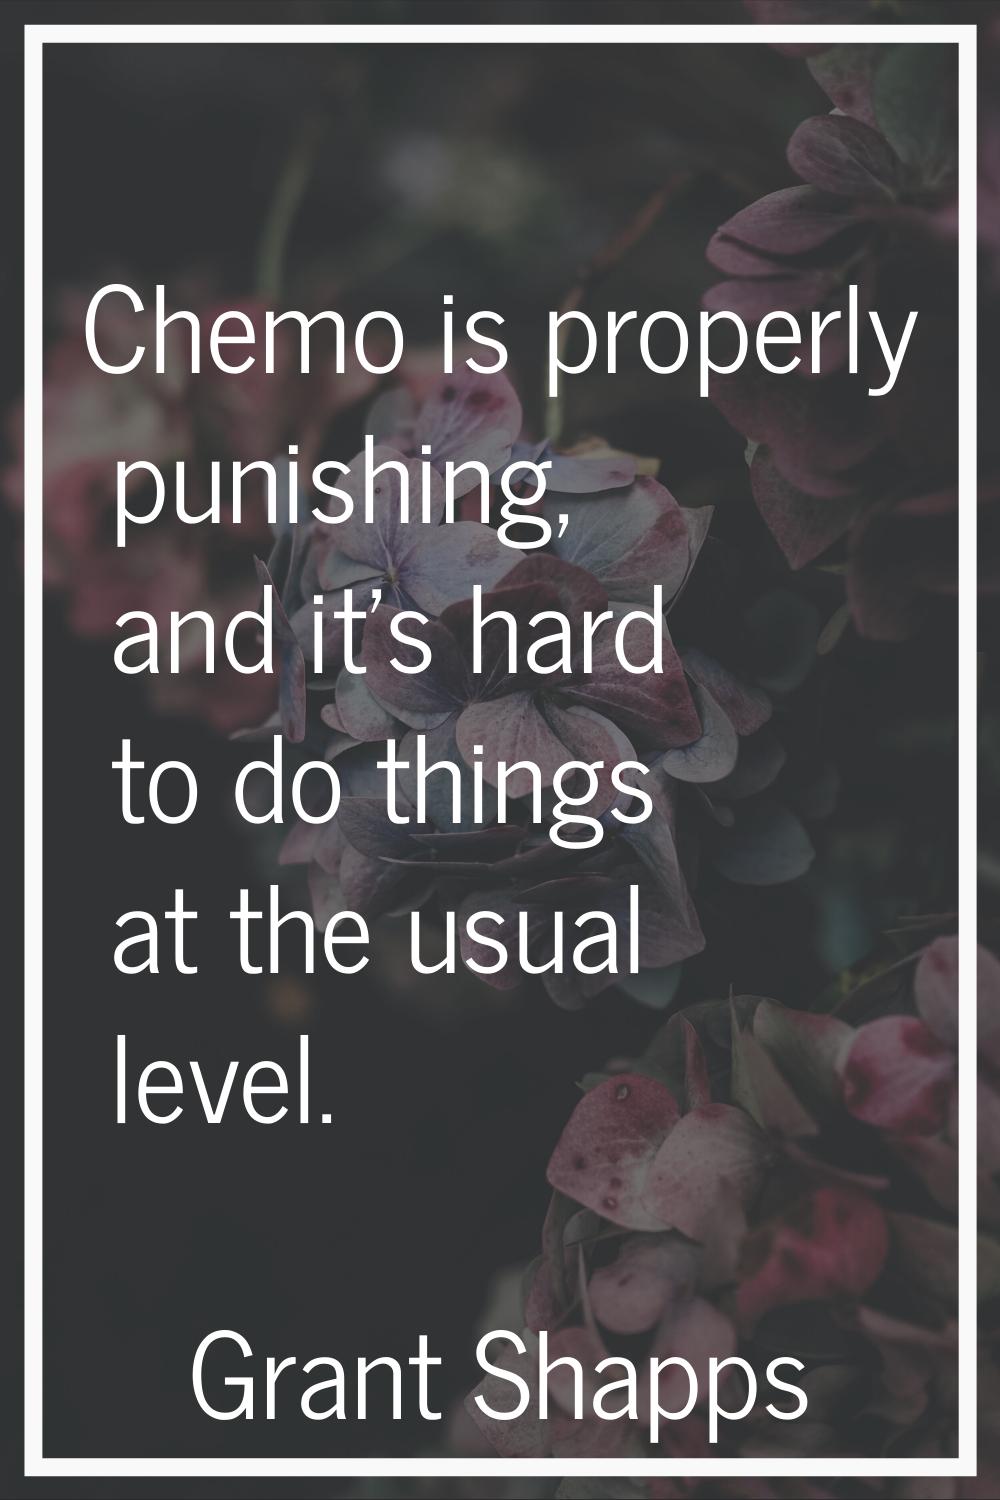 Chemo is properly punishing, and it's hard to do things at the usual level.